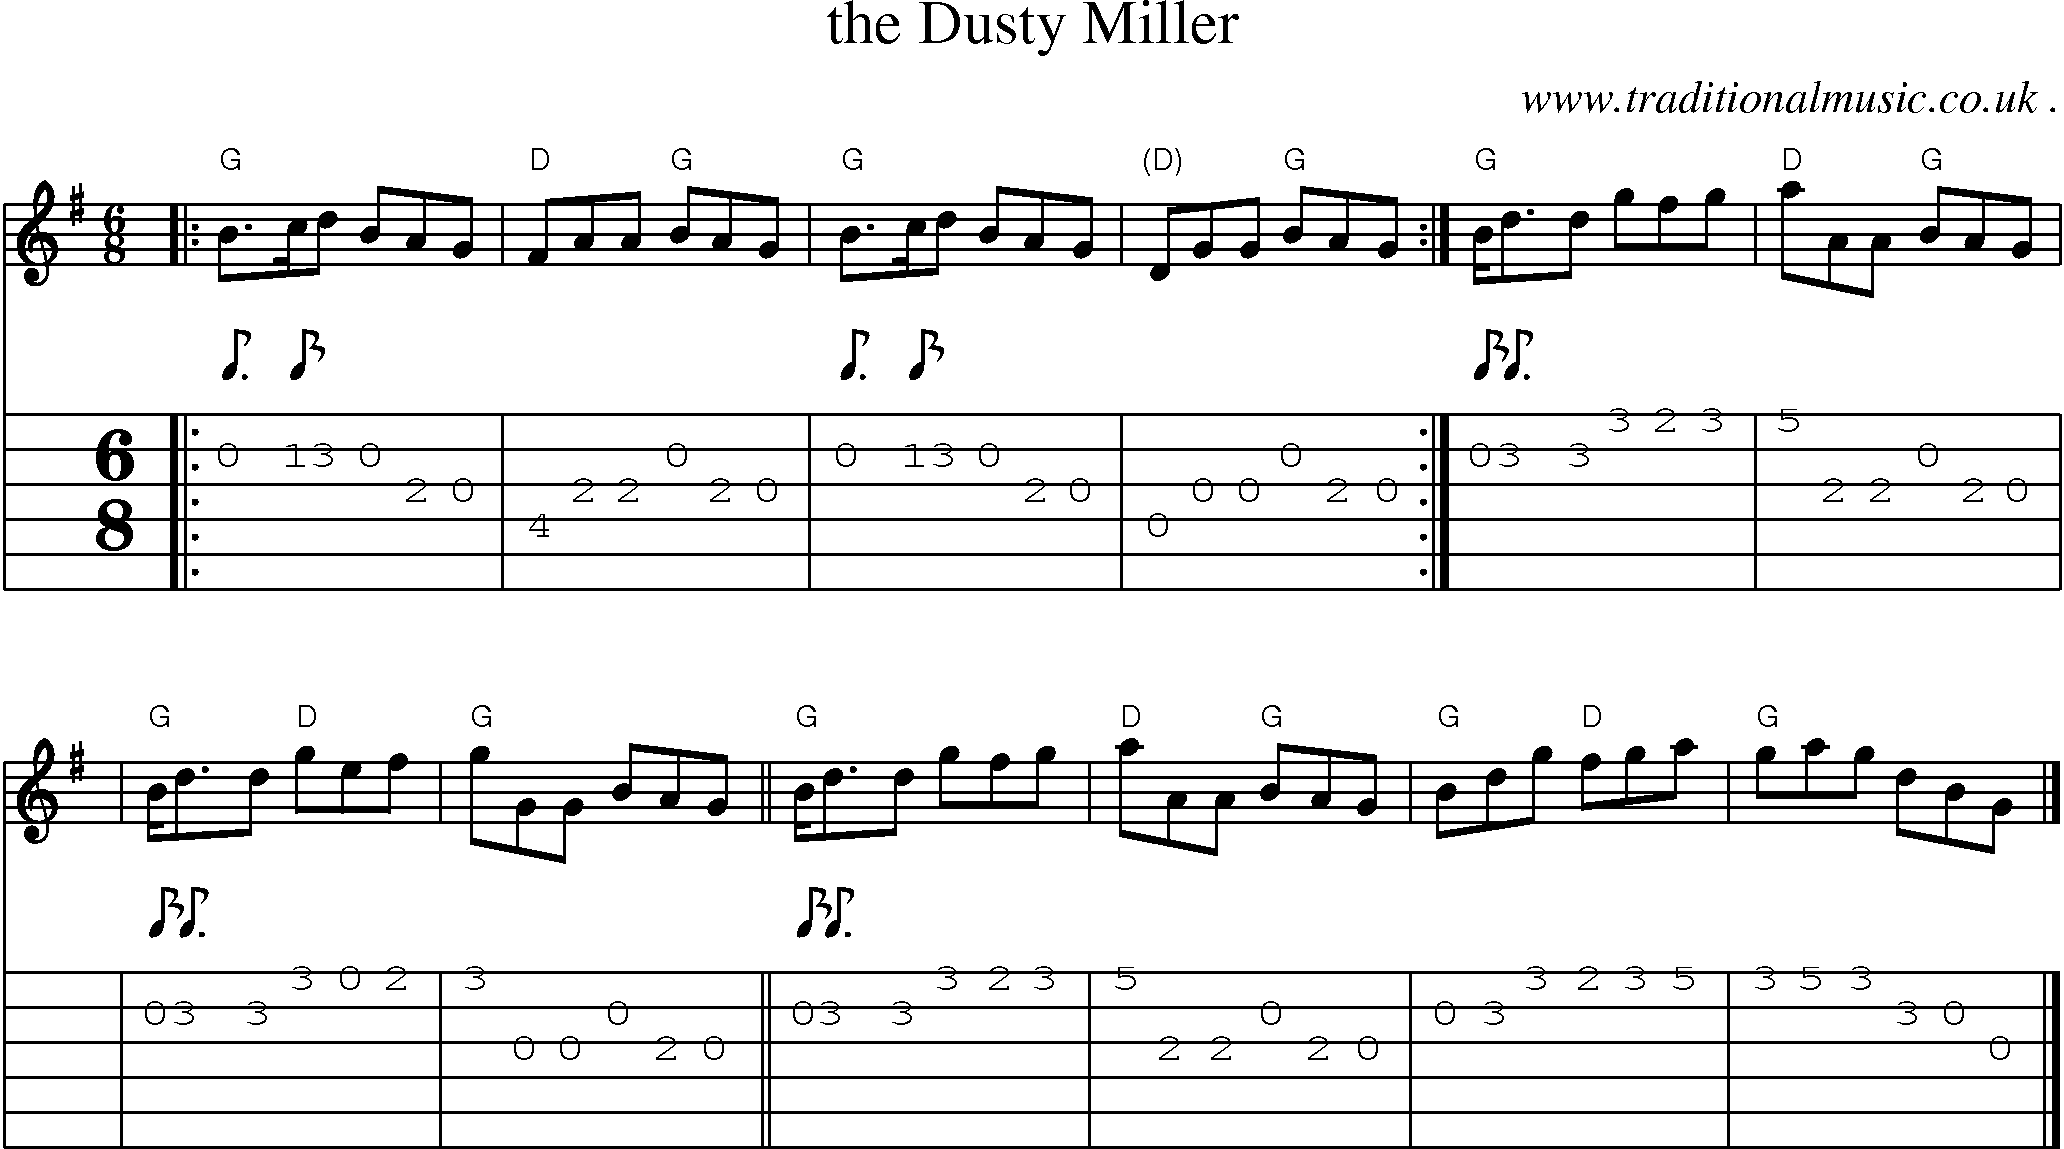 Sheet-music  score, Chords and Guitar Tabs for The Dusty Miller